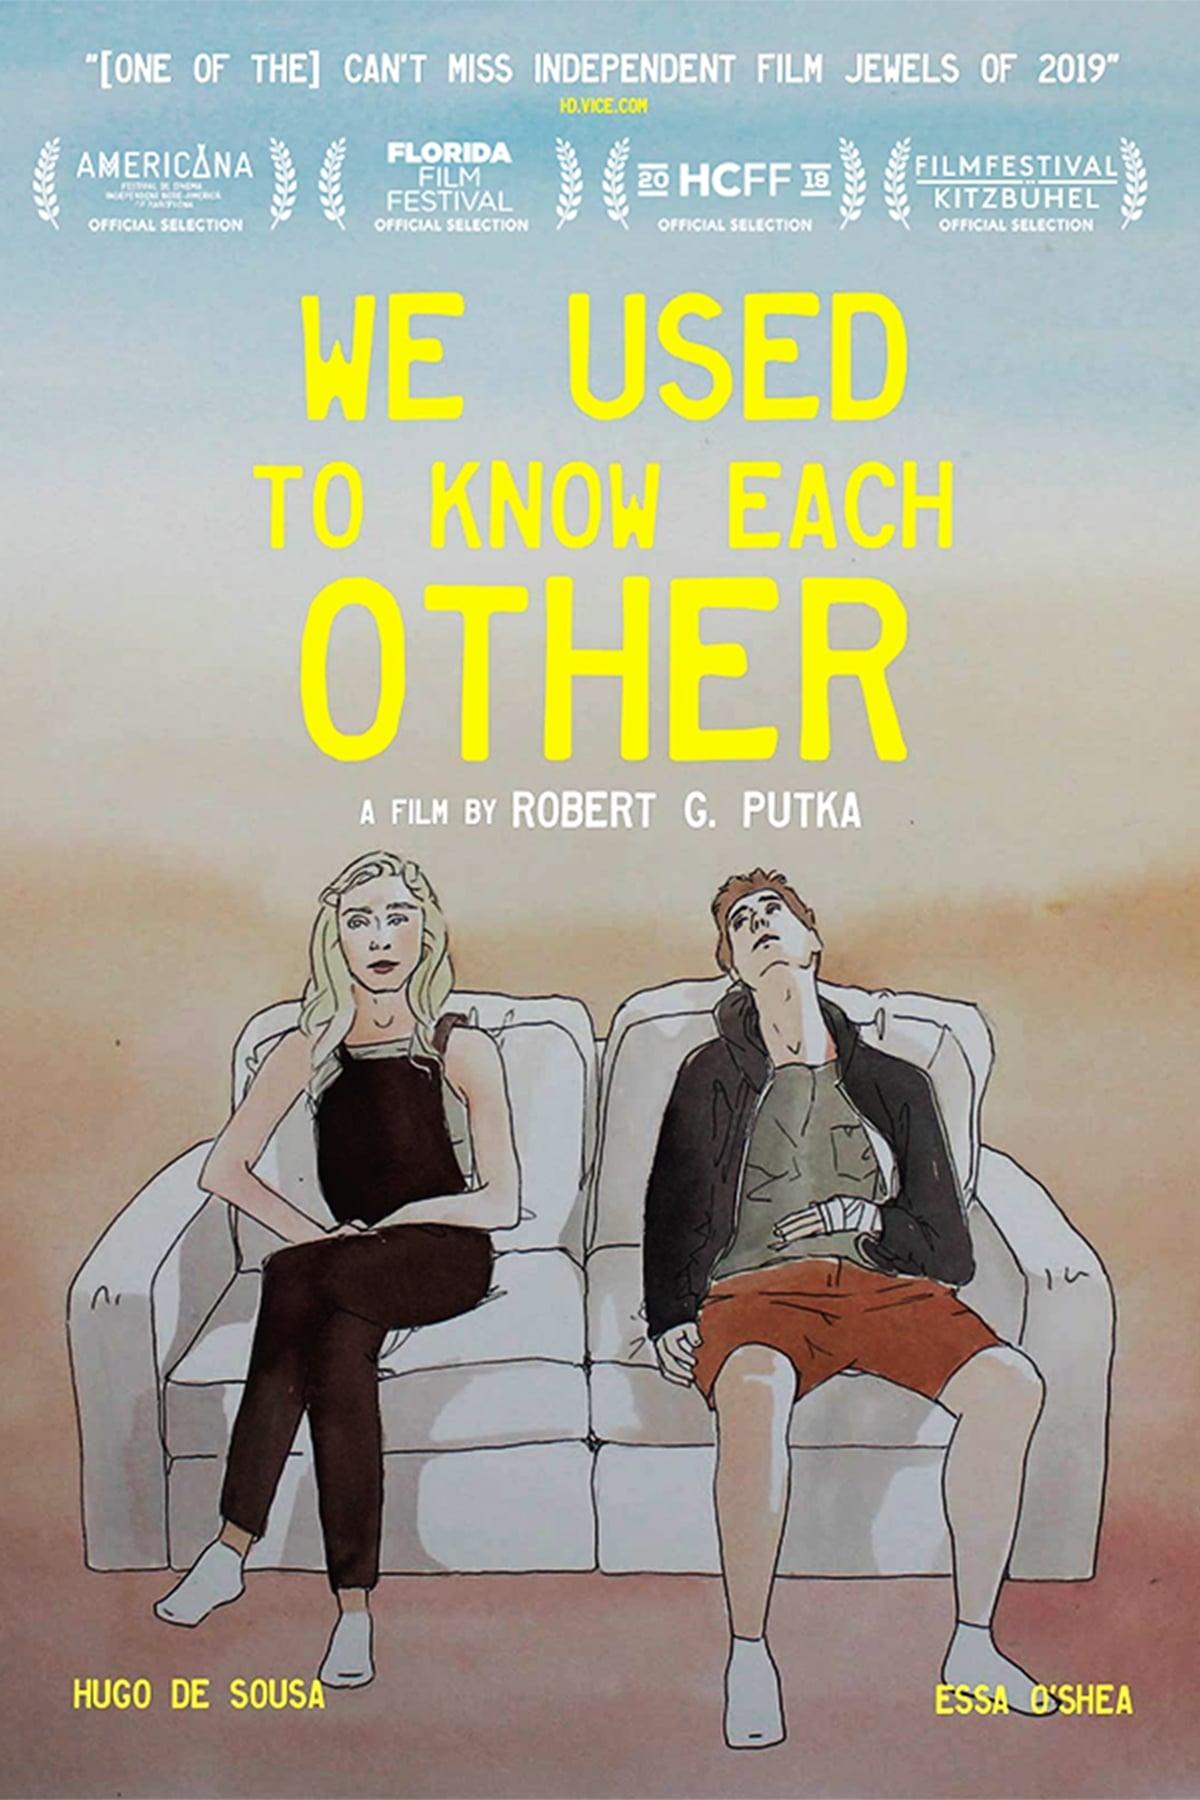 We Used to Know Each Other poster